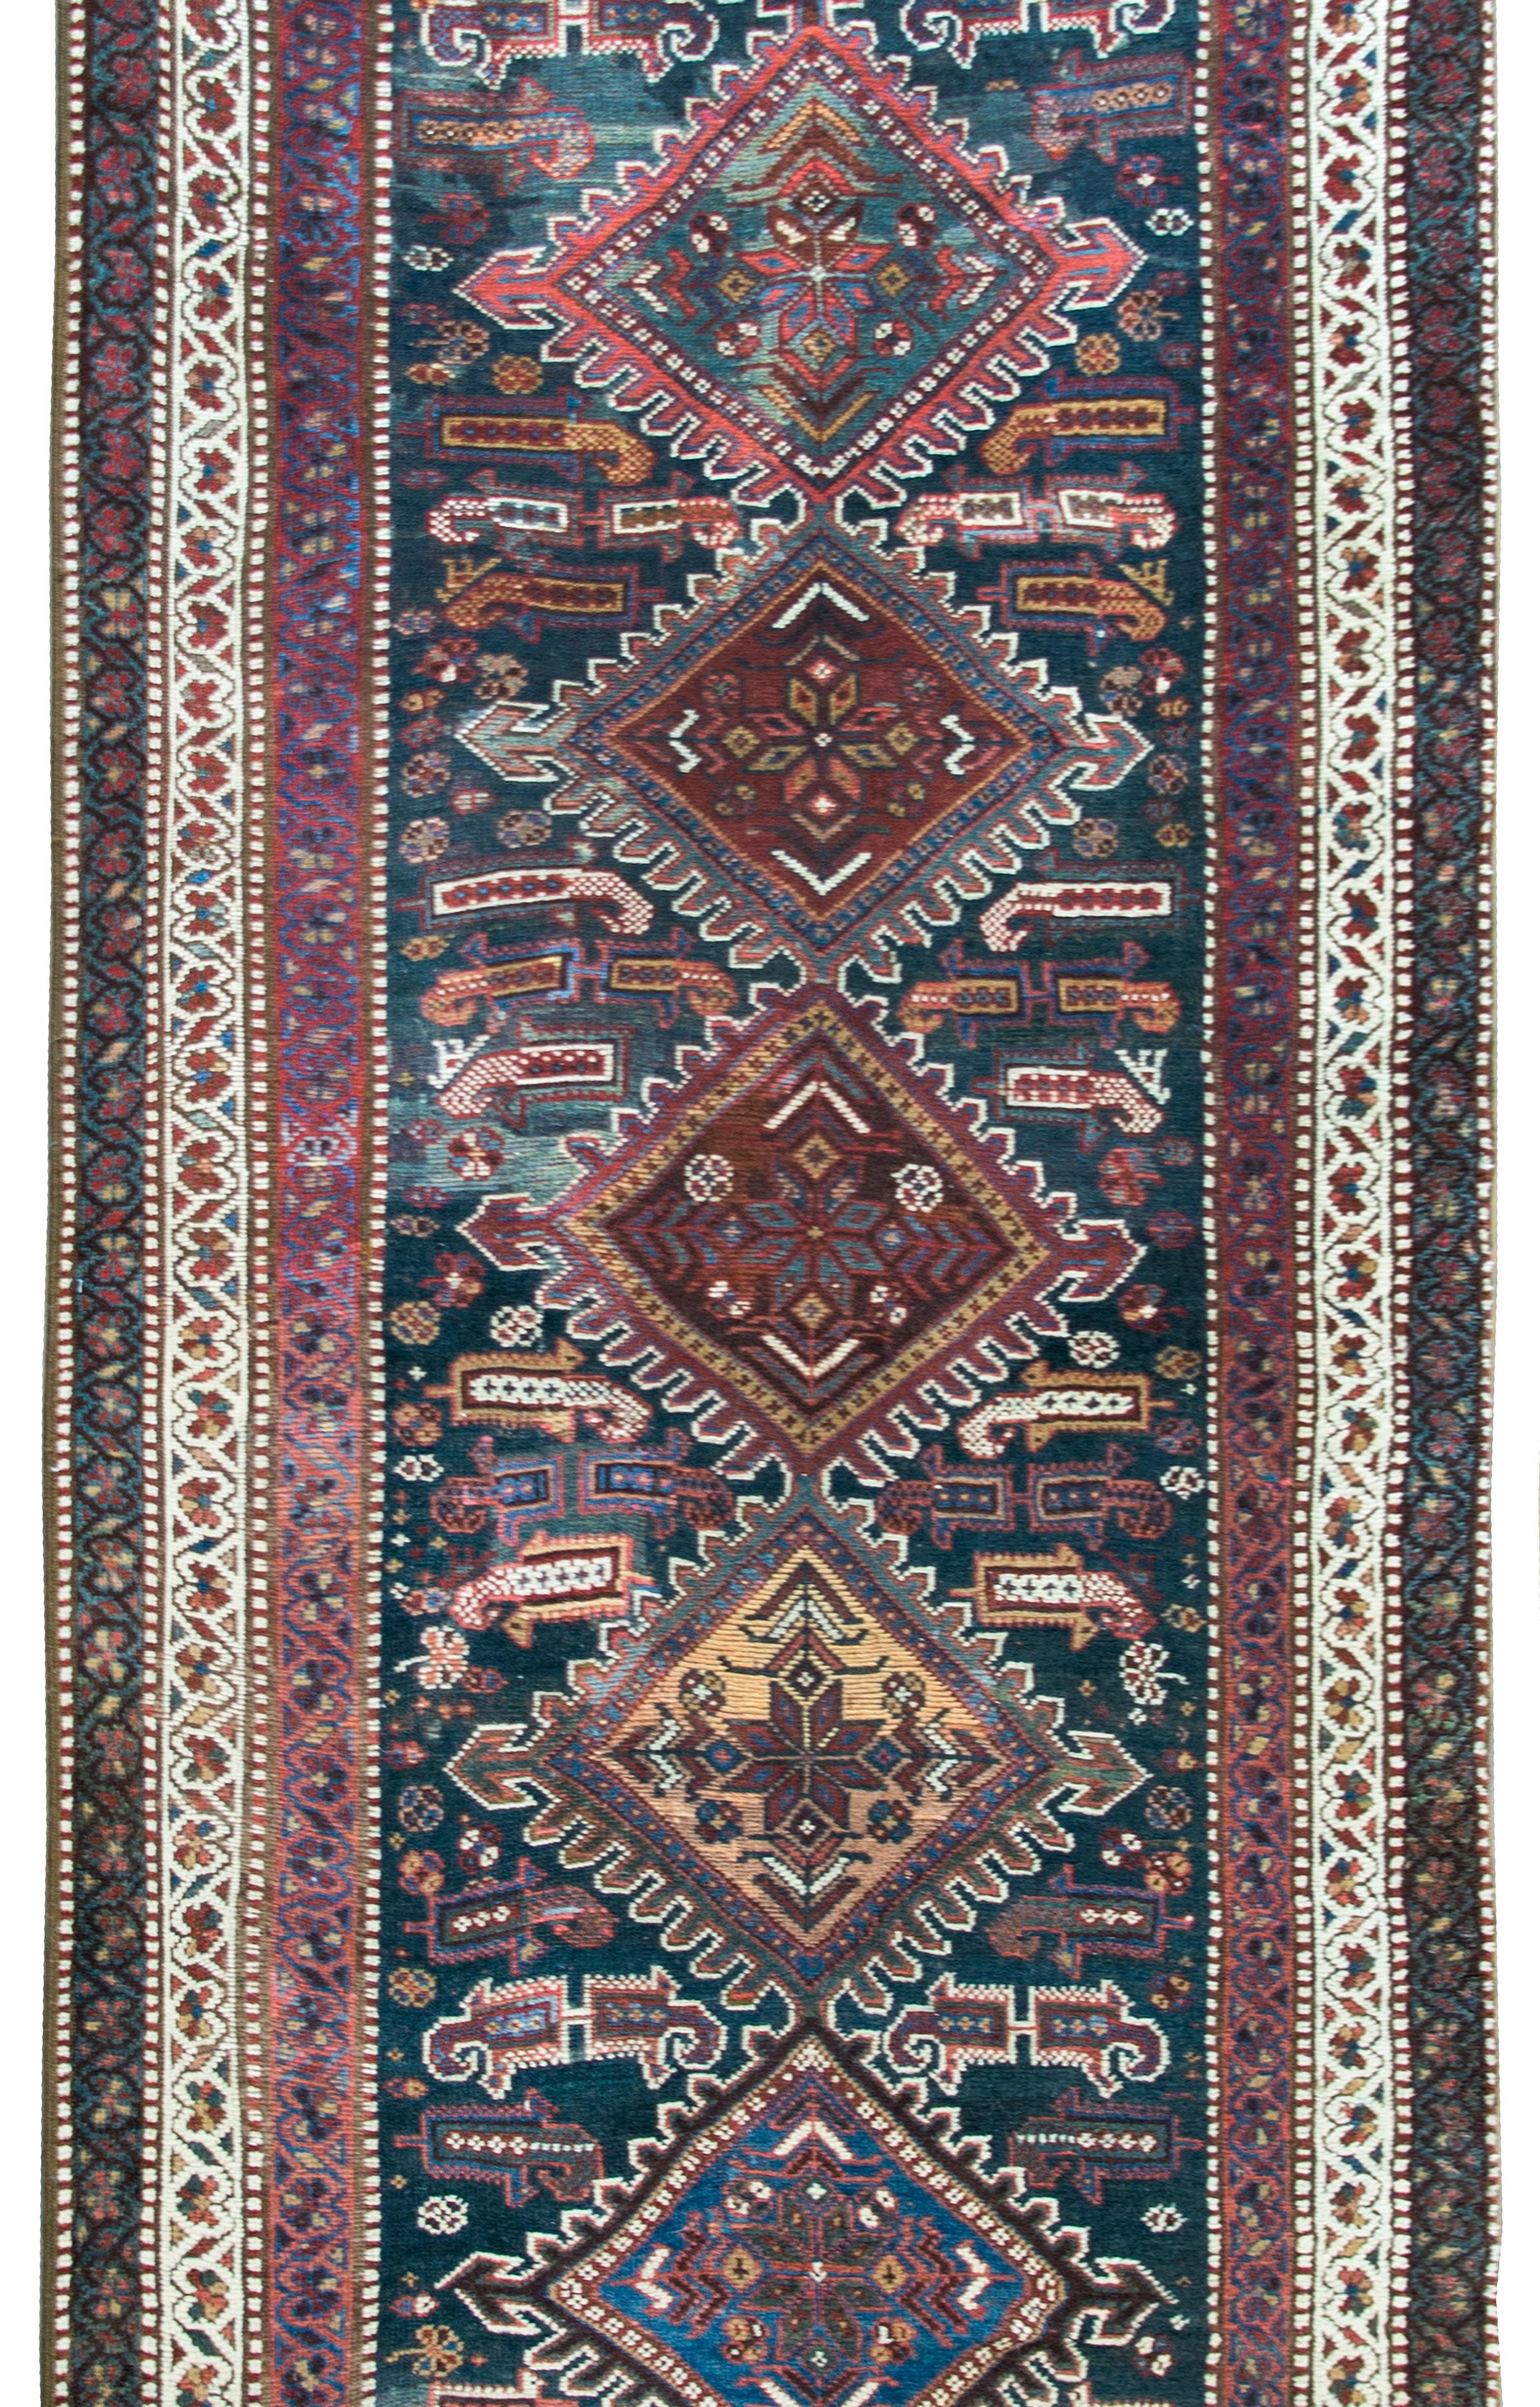 A beautiful early 20th century Persian Qashqai runner with the most wonderful tribal pattern with seven large diamond medallions, each woven with stylized flowers, and living amidst a field of stylized paisley patterns, surrounded by a border